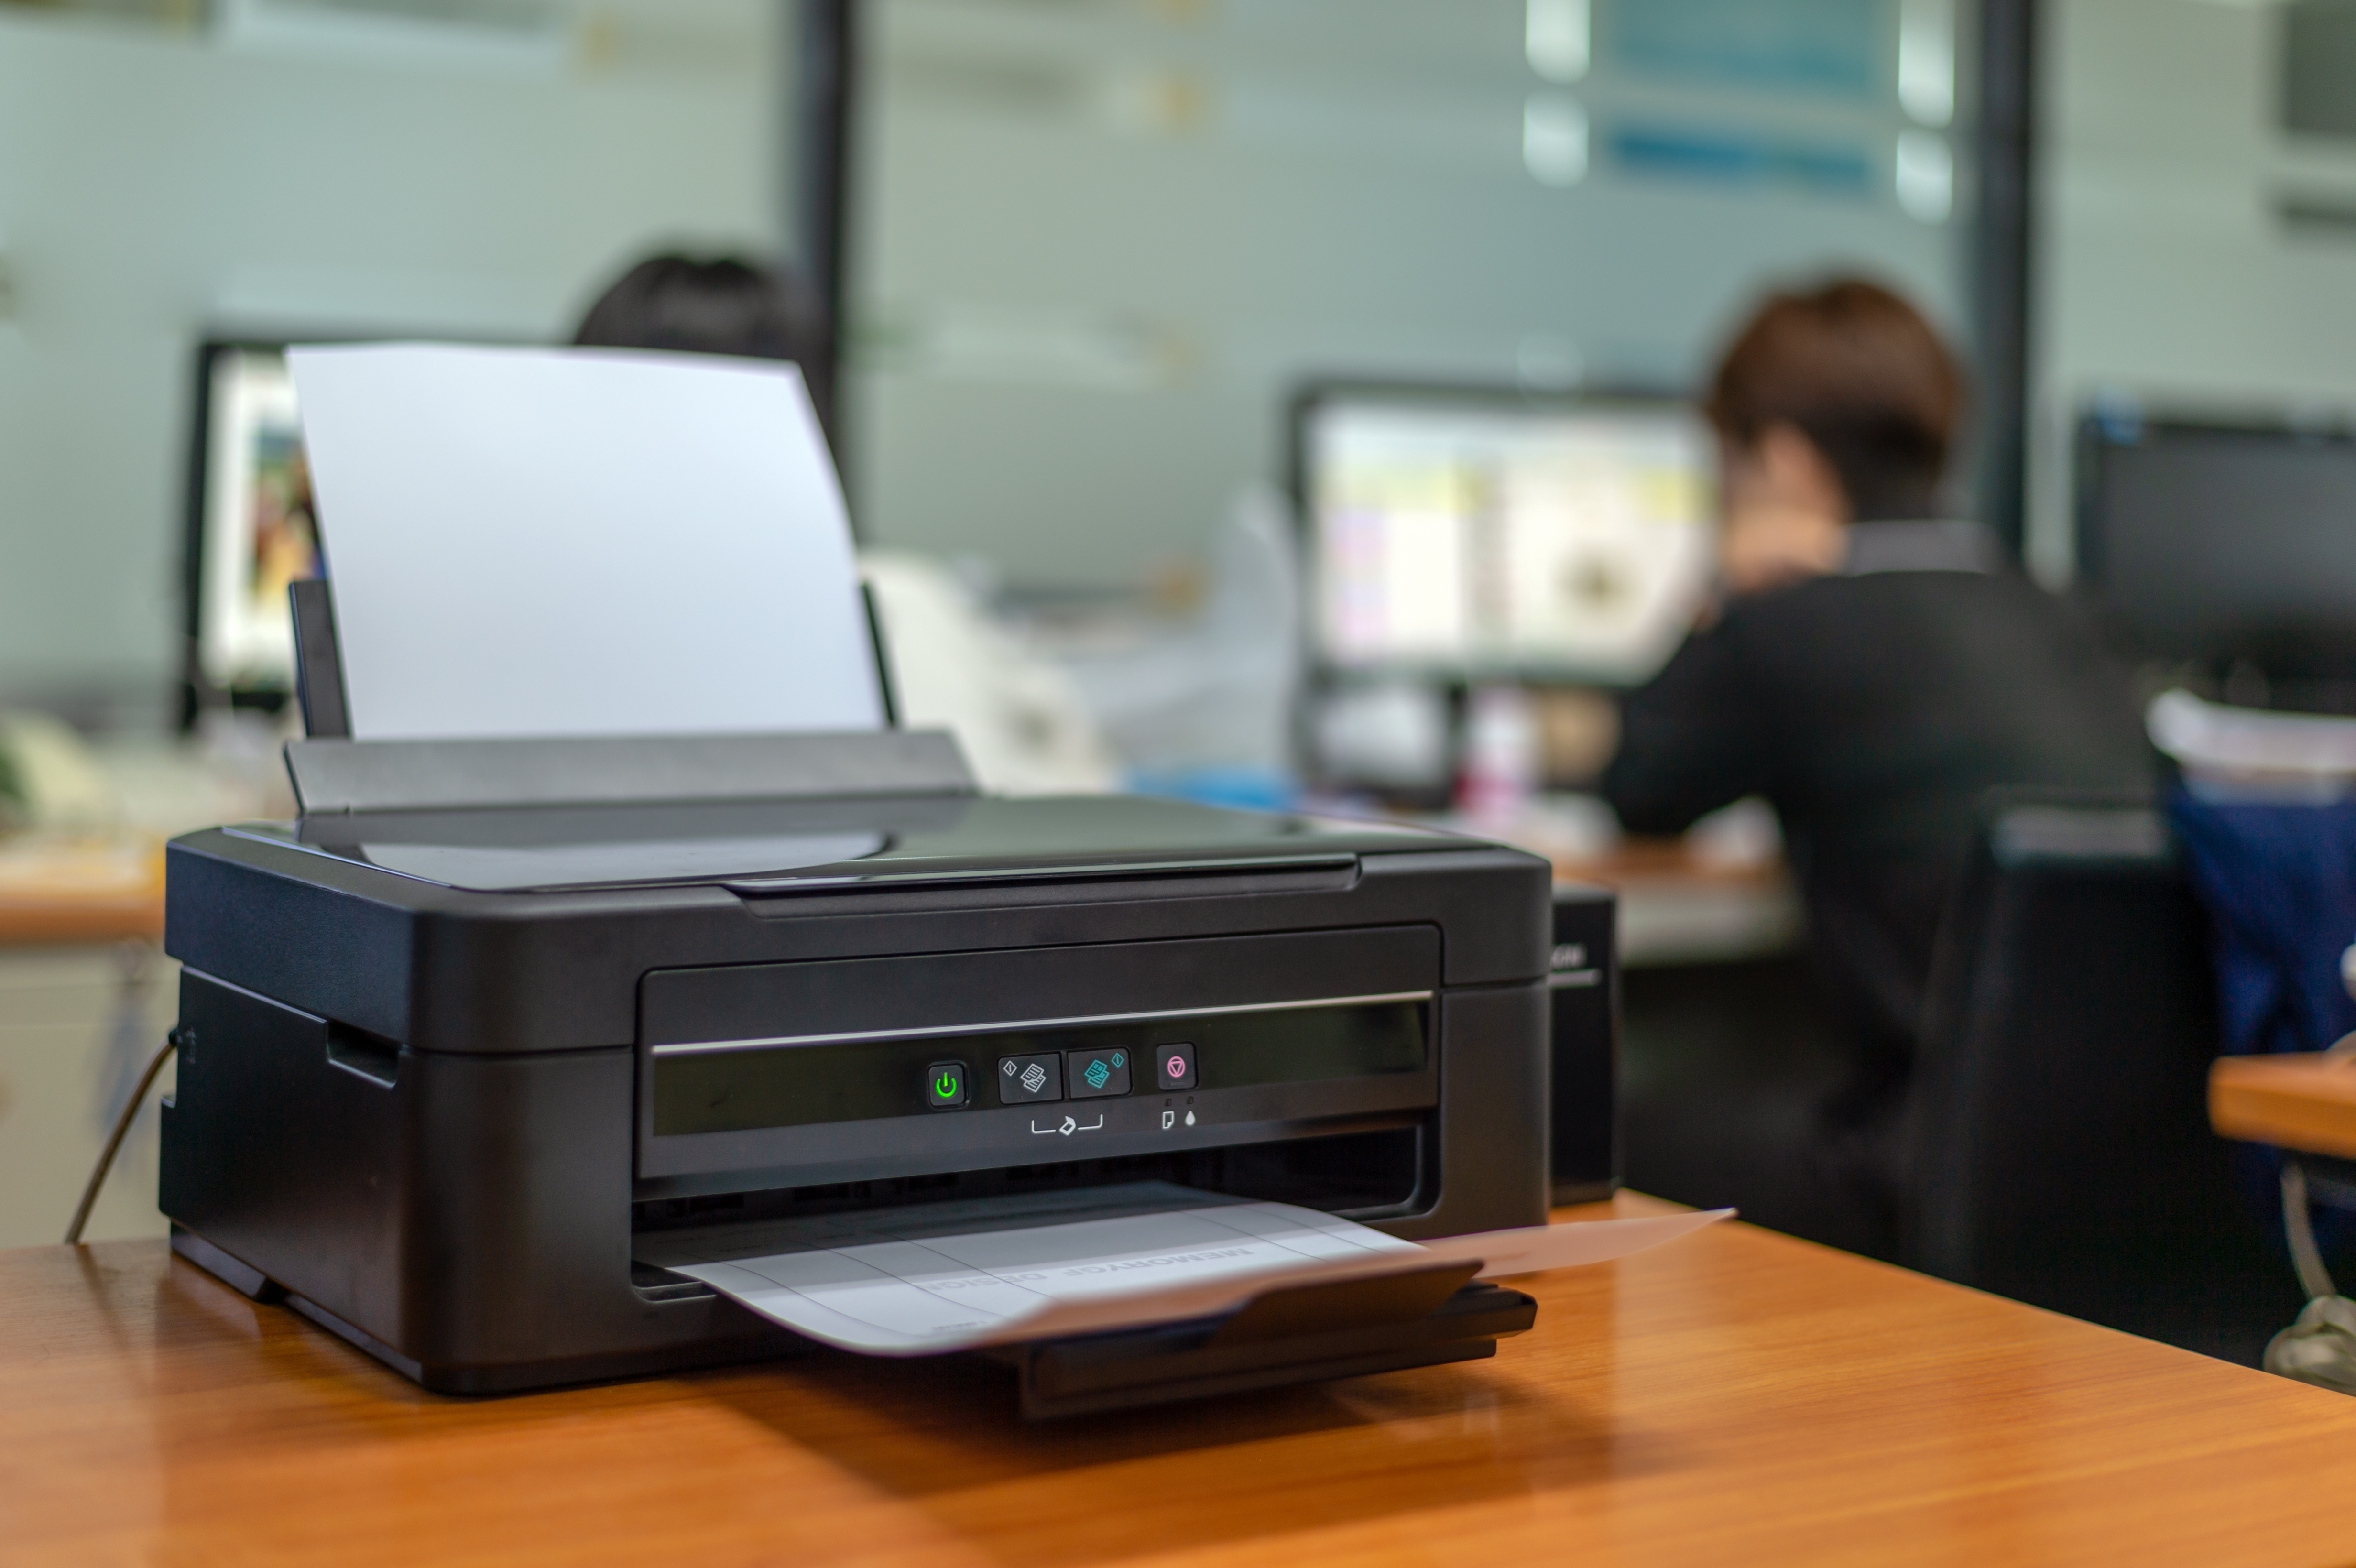 Are Managed Print Services Right For You?